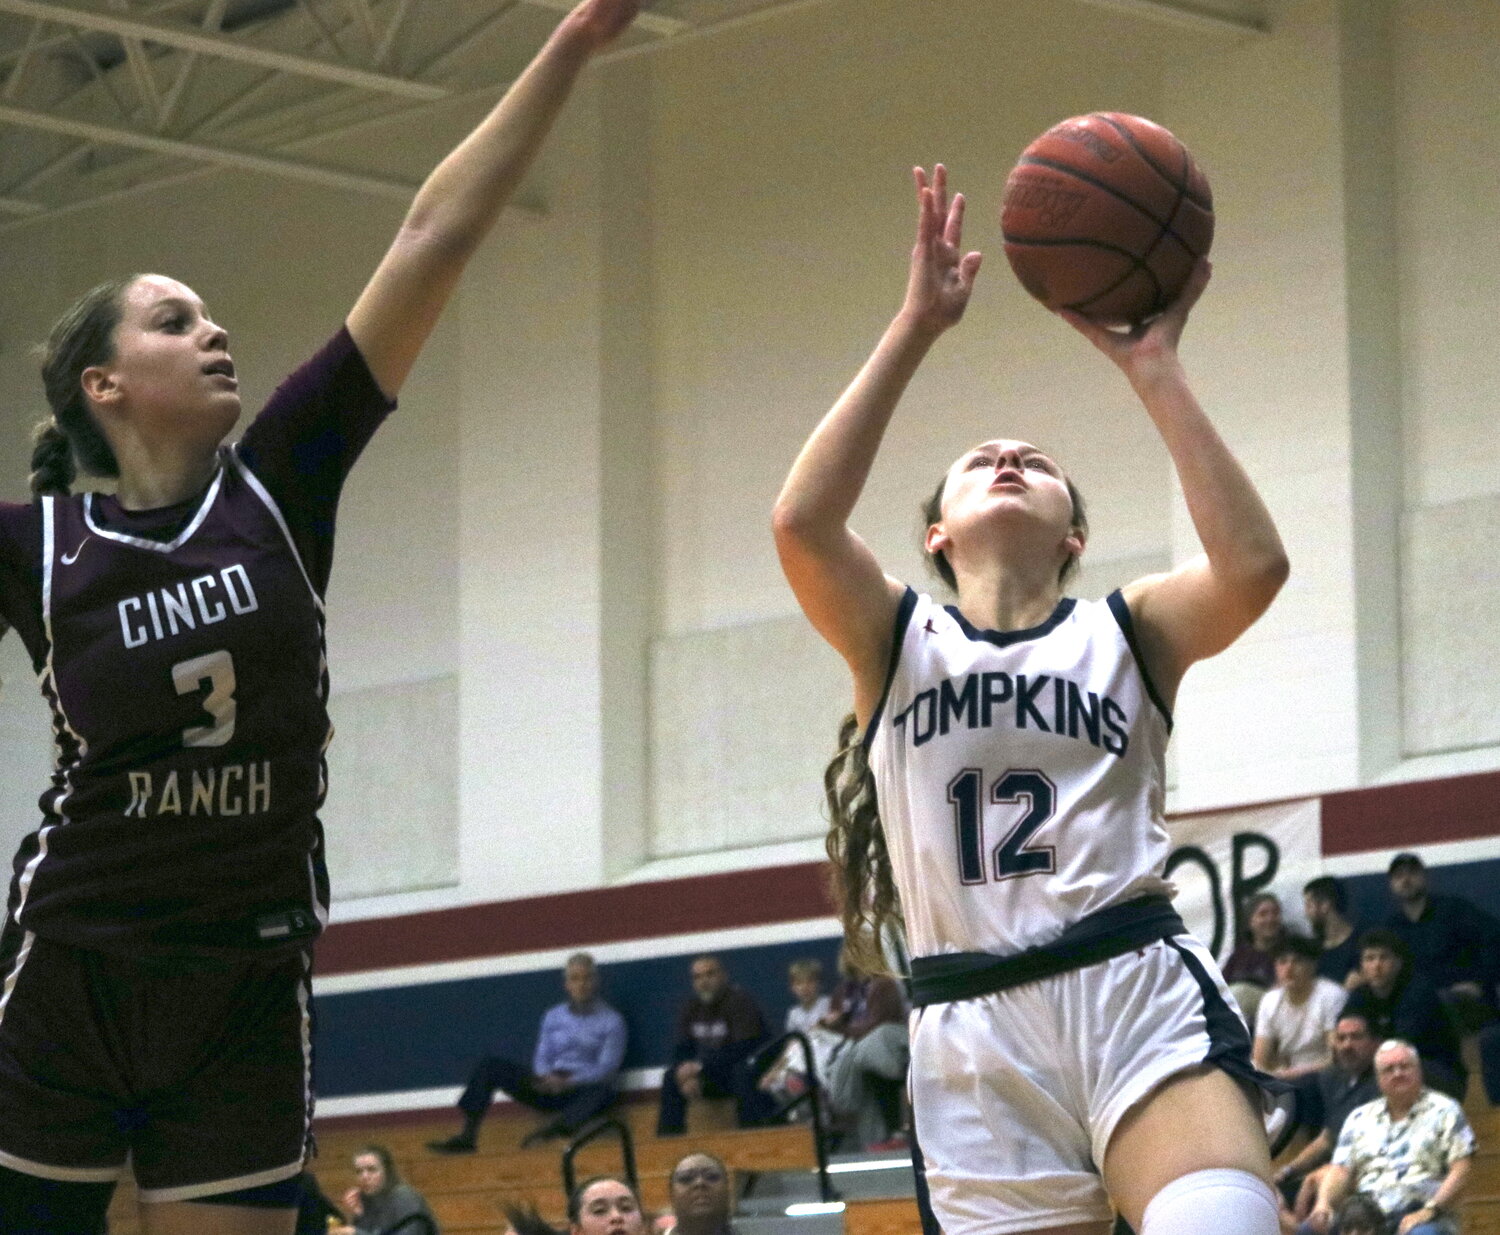 Haylie Panter shoots a layup during Tuesday's game between Tompkins and Cinco Ranch at the Tompkins gym.